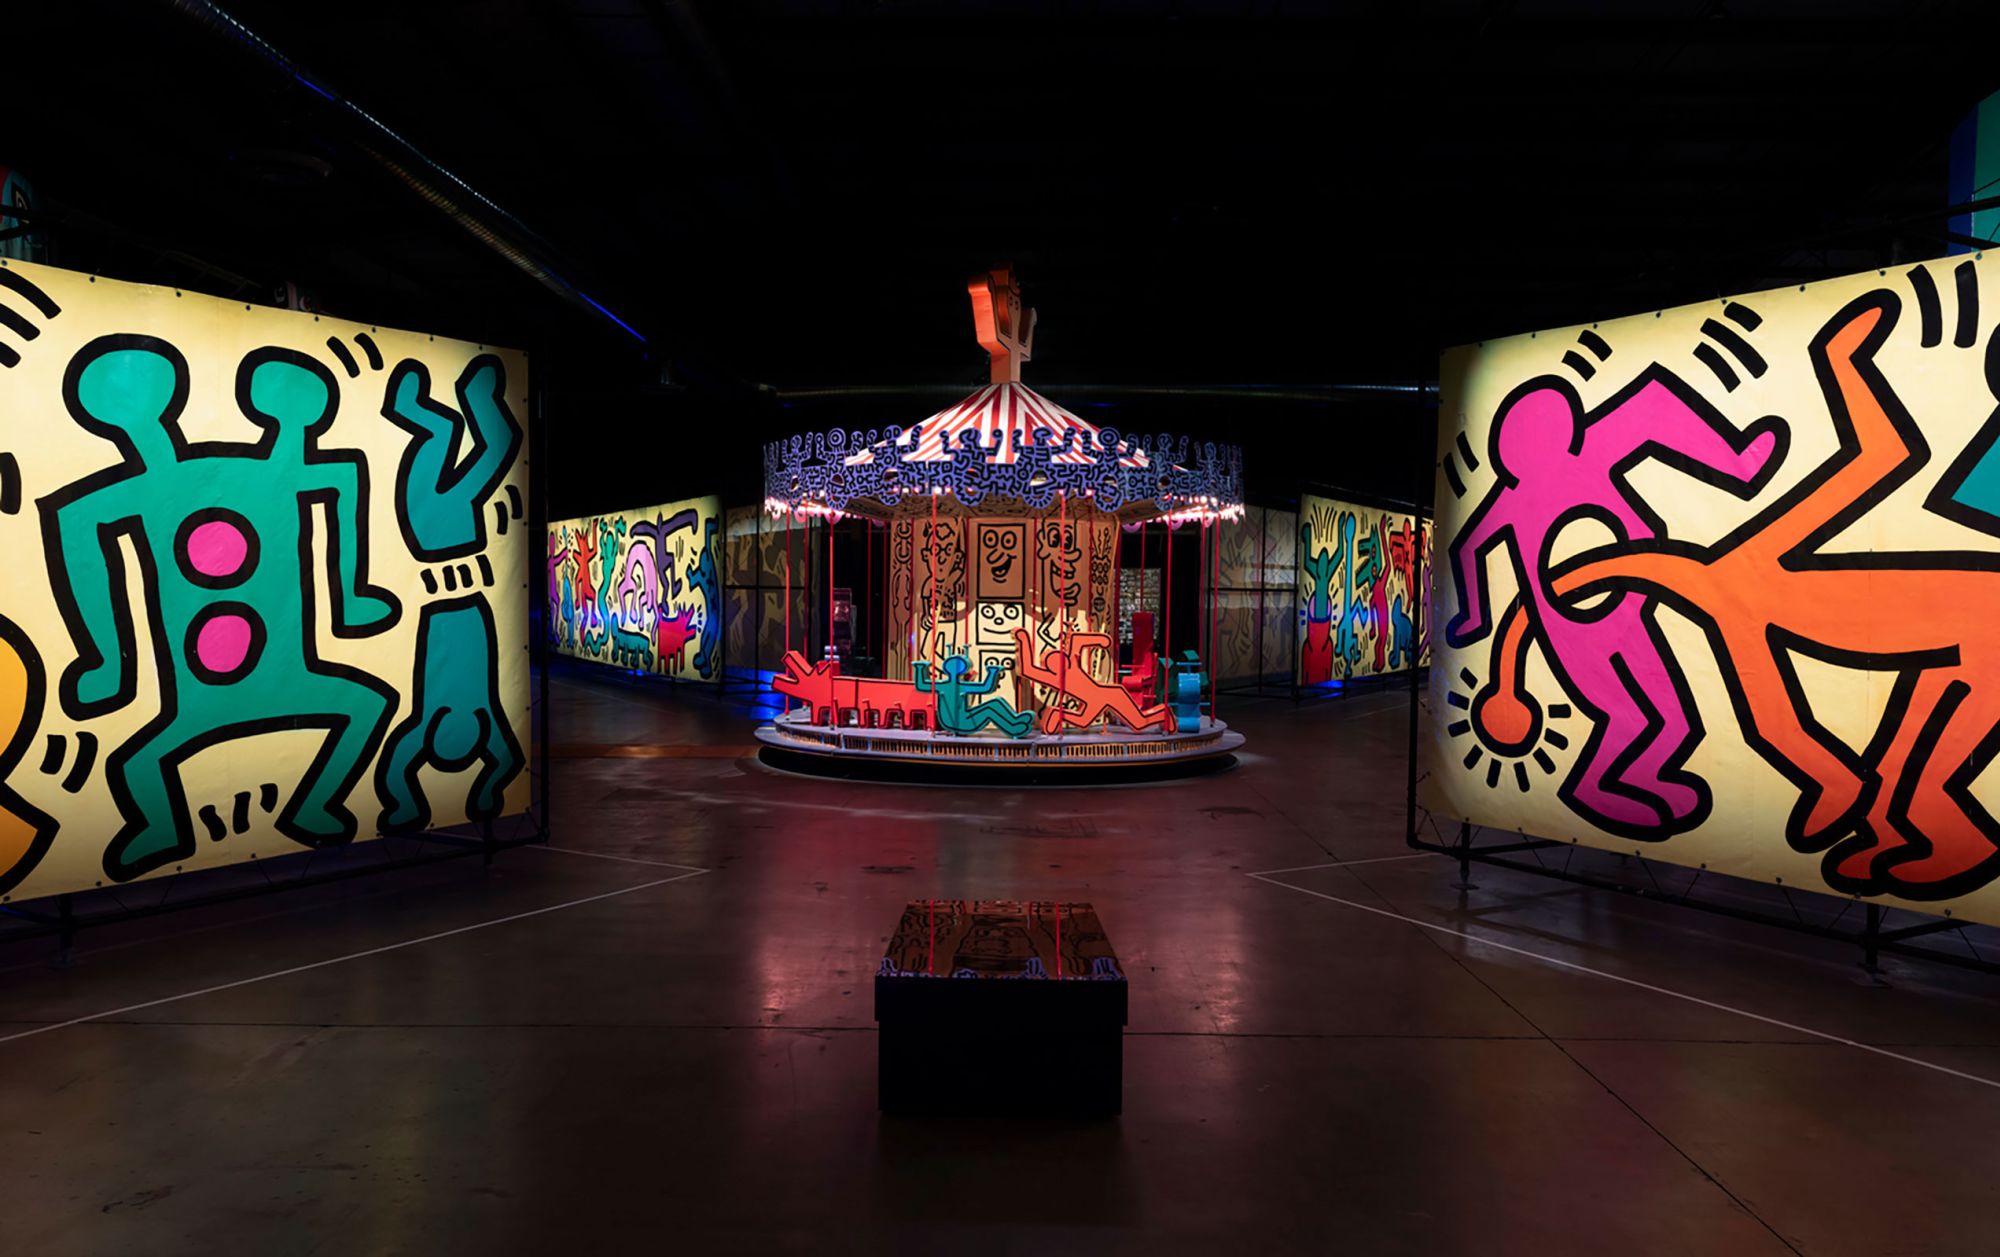 A Keith Haring-designer carousel (with the artist's signature figures replacing the ride's traditional horses) and accompanying murals pictured at "Luna Luna: Forgotten Fantasy."